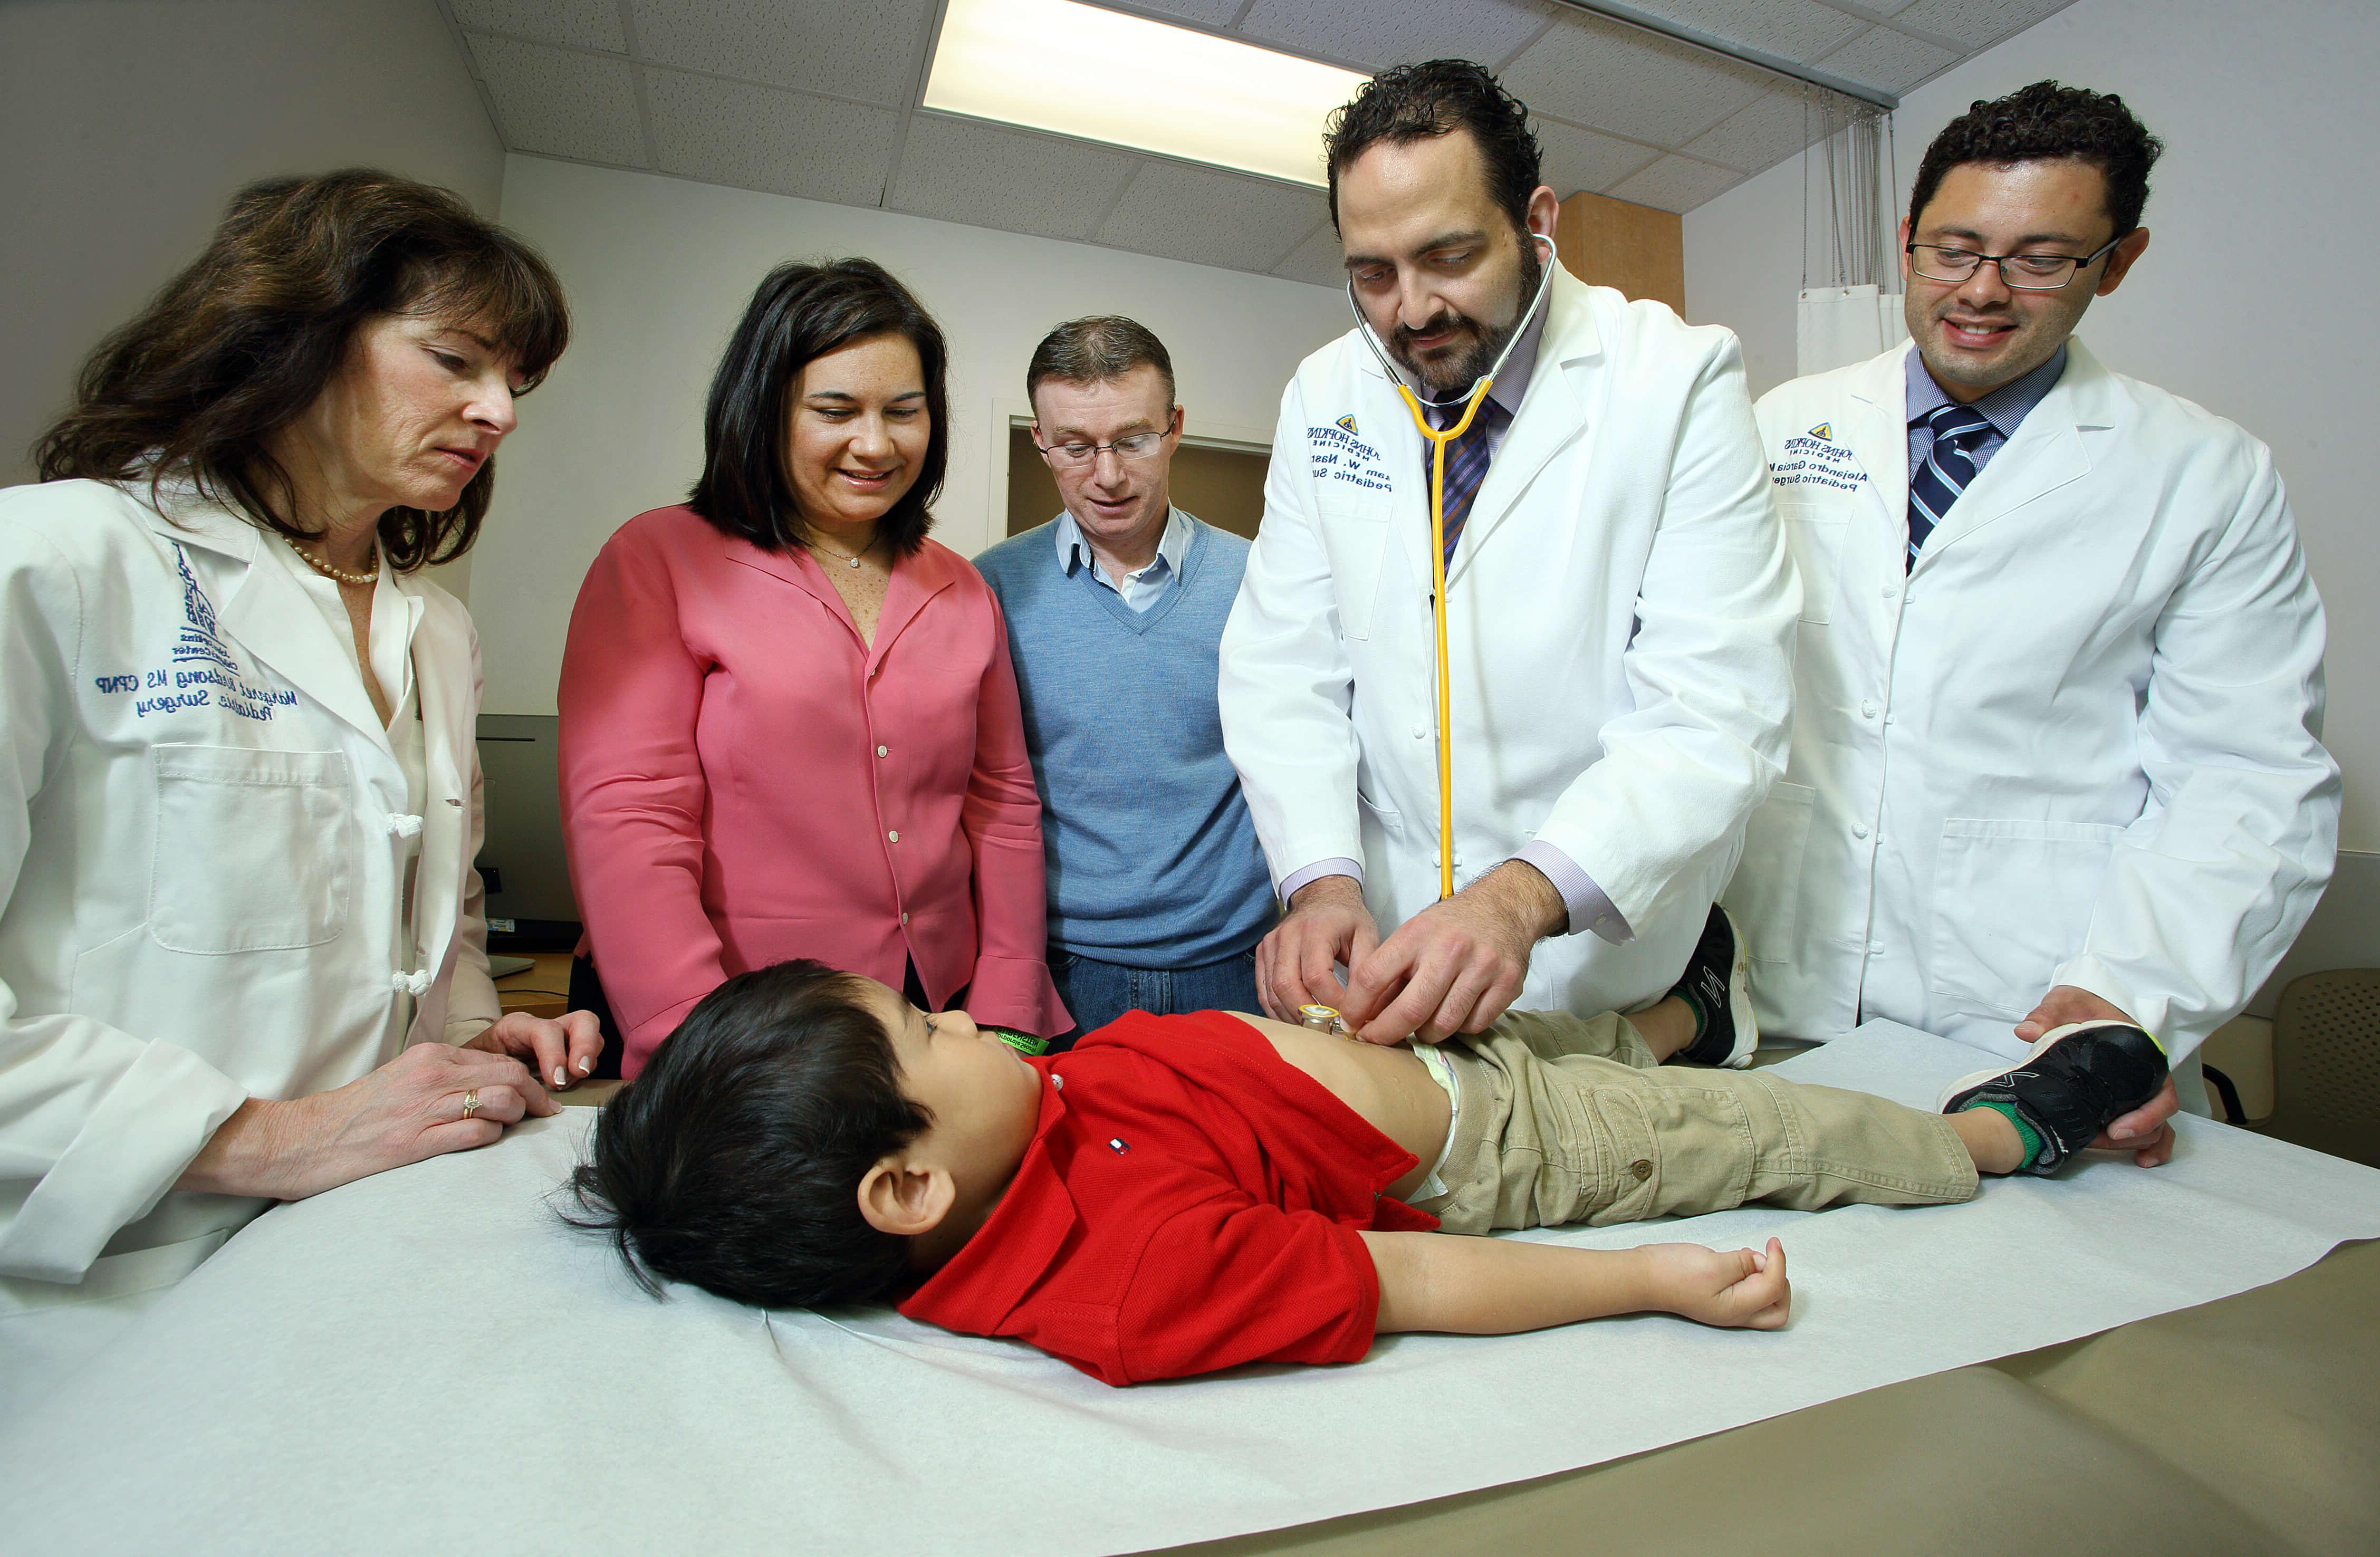 In the bowel management clinic with a young patient